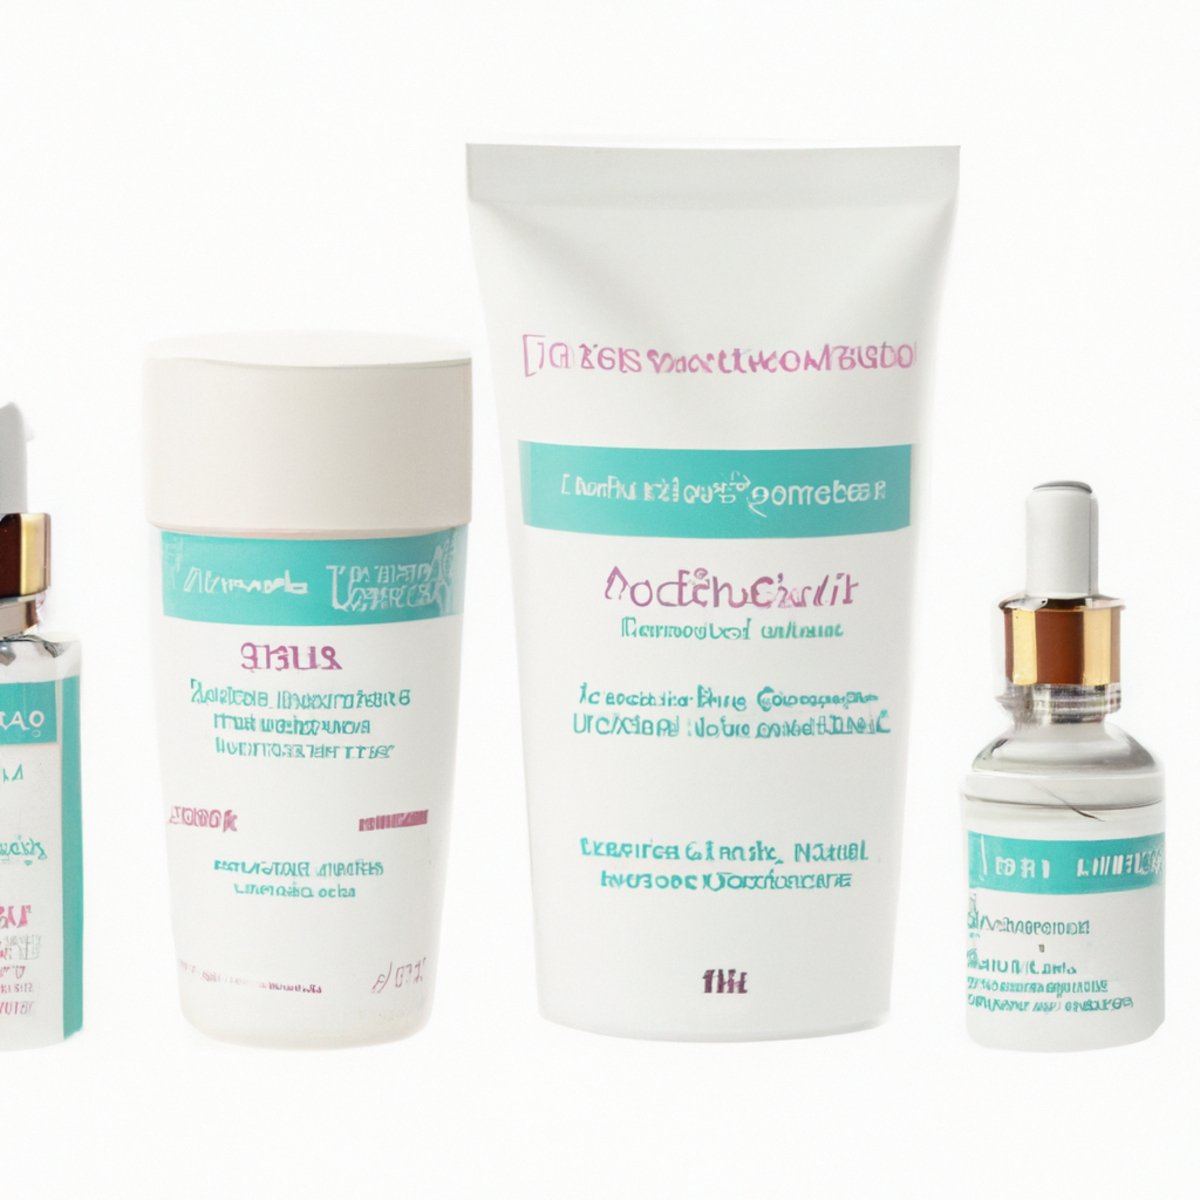 Assorted melasma treatment skincare products displayed on a white background, highlighting labels, textures, and vibrant colors.